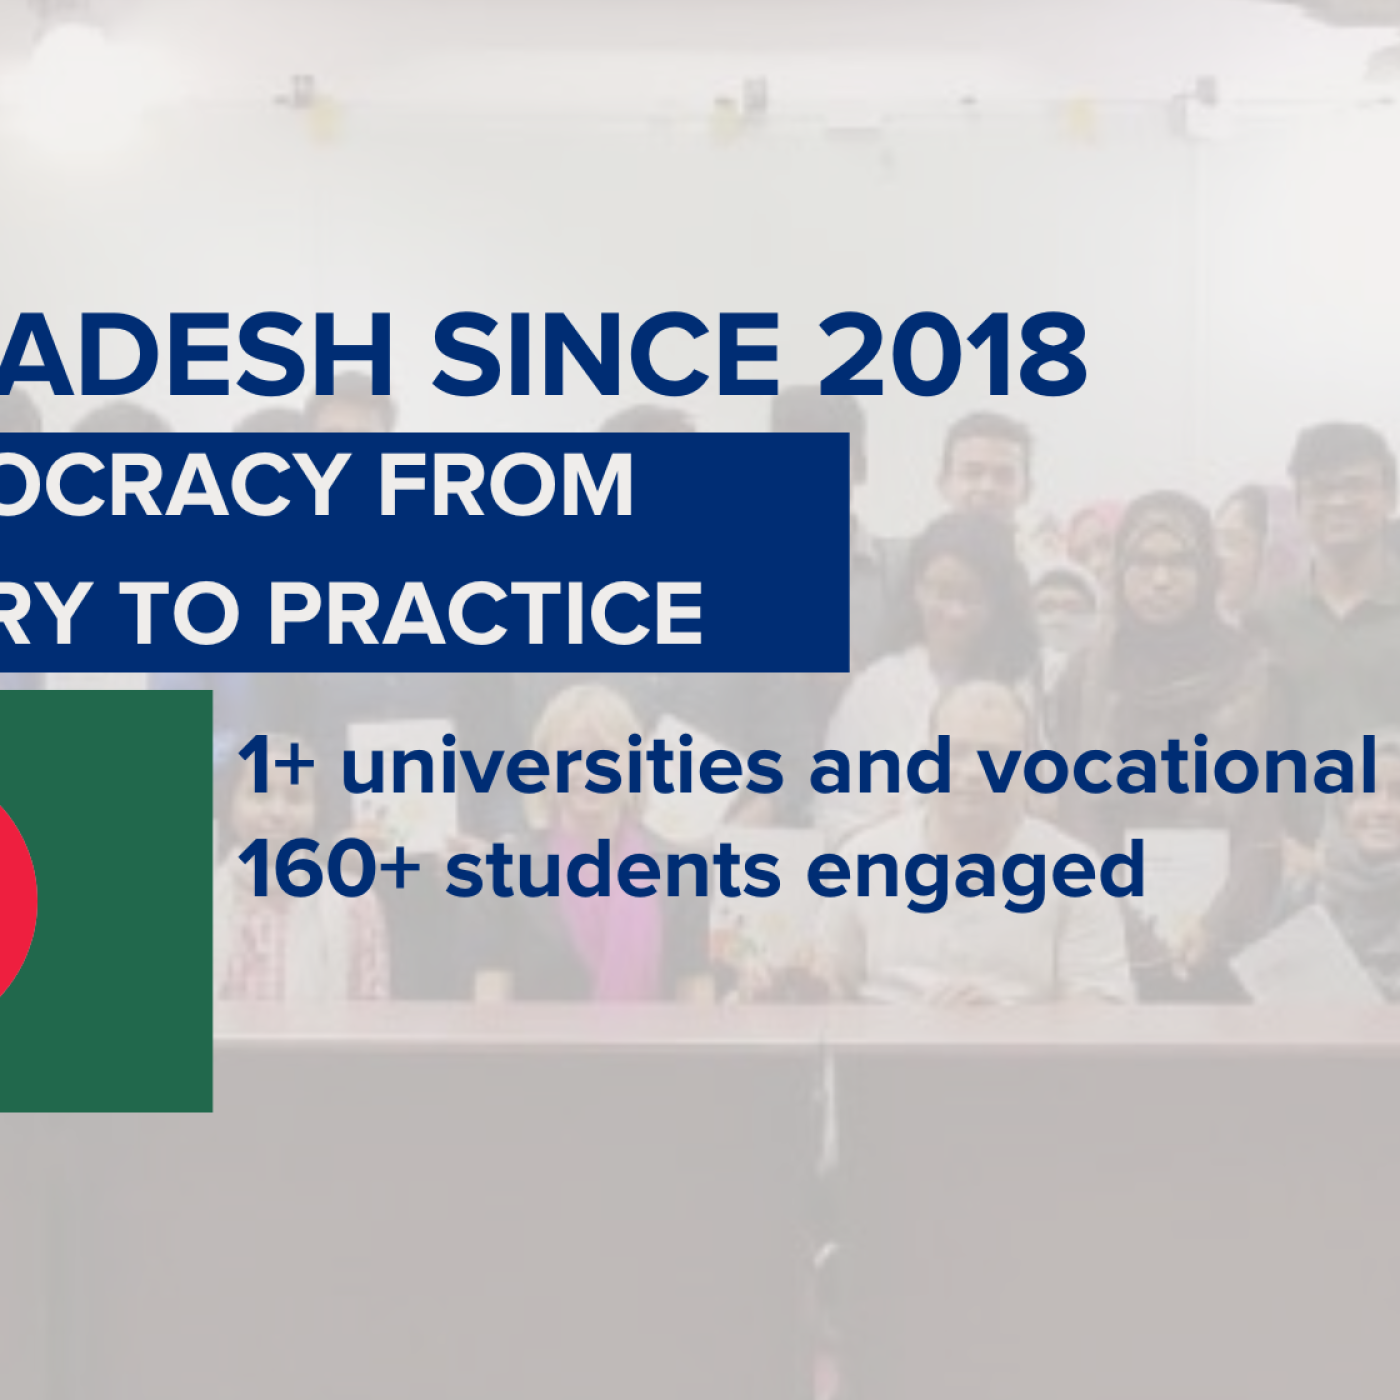 Bangladesh Since 2018 Democracy from Theory to Practice, 1+ Universities and vocational schools, 160+ students engaged